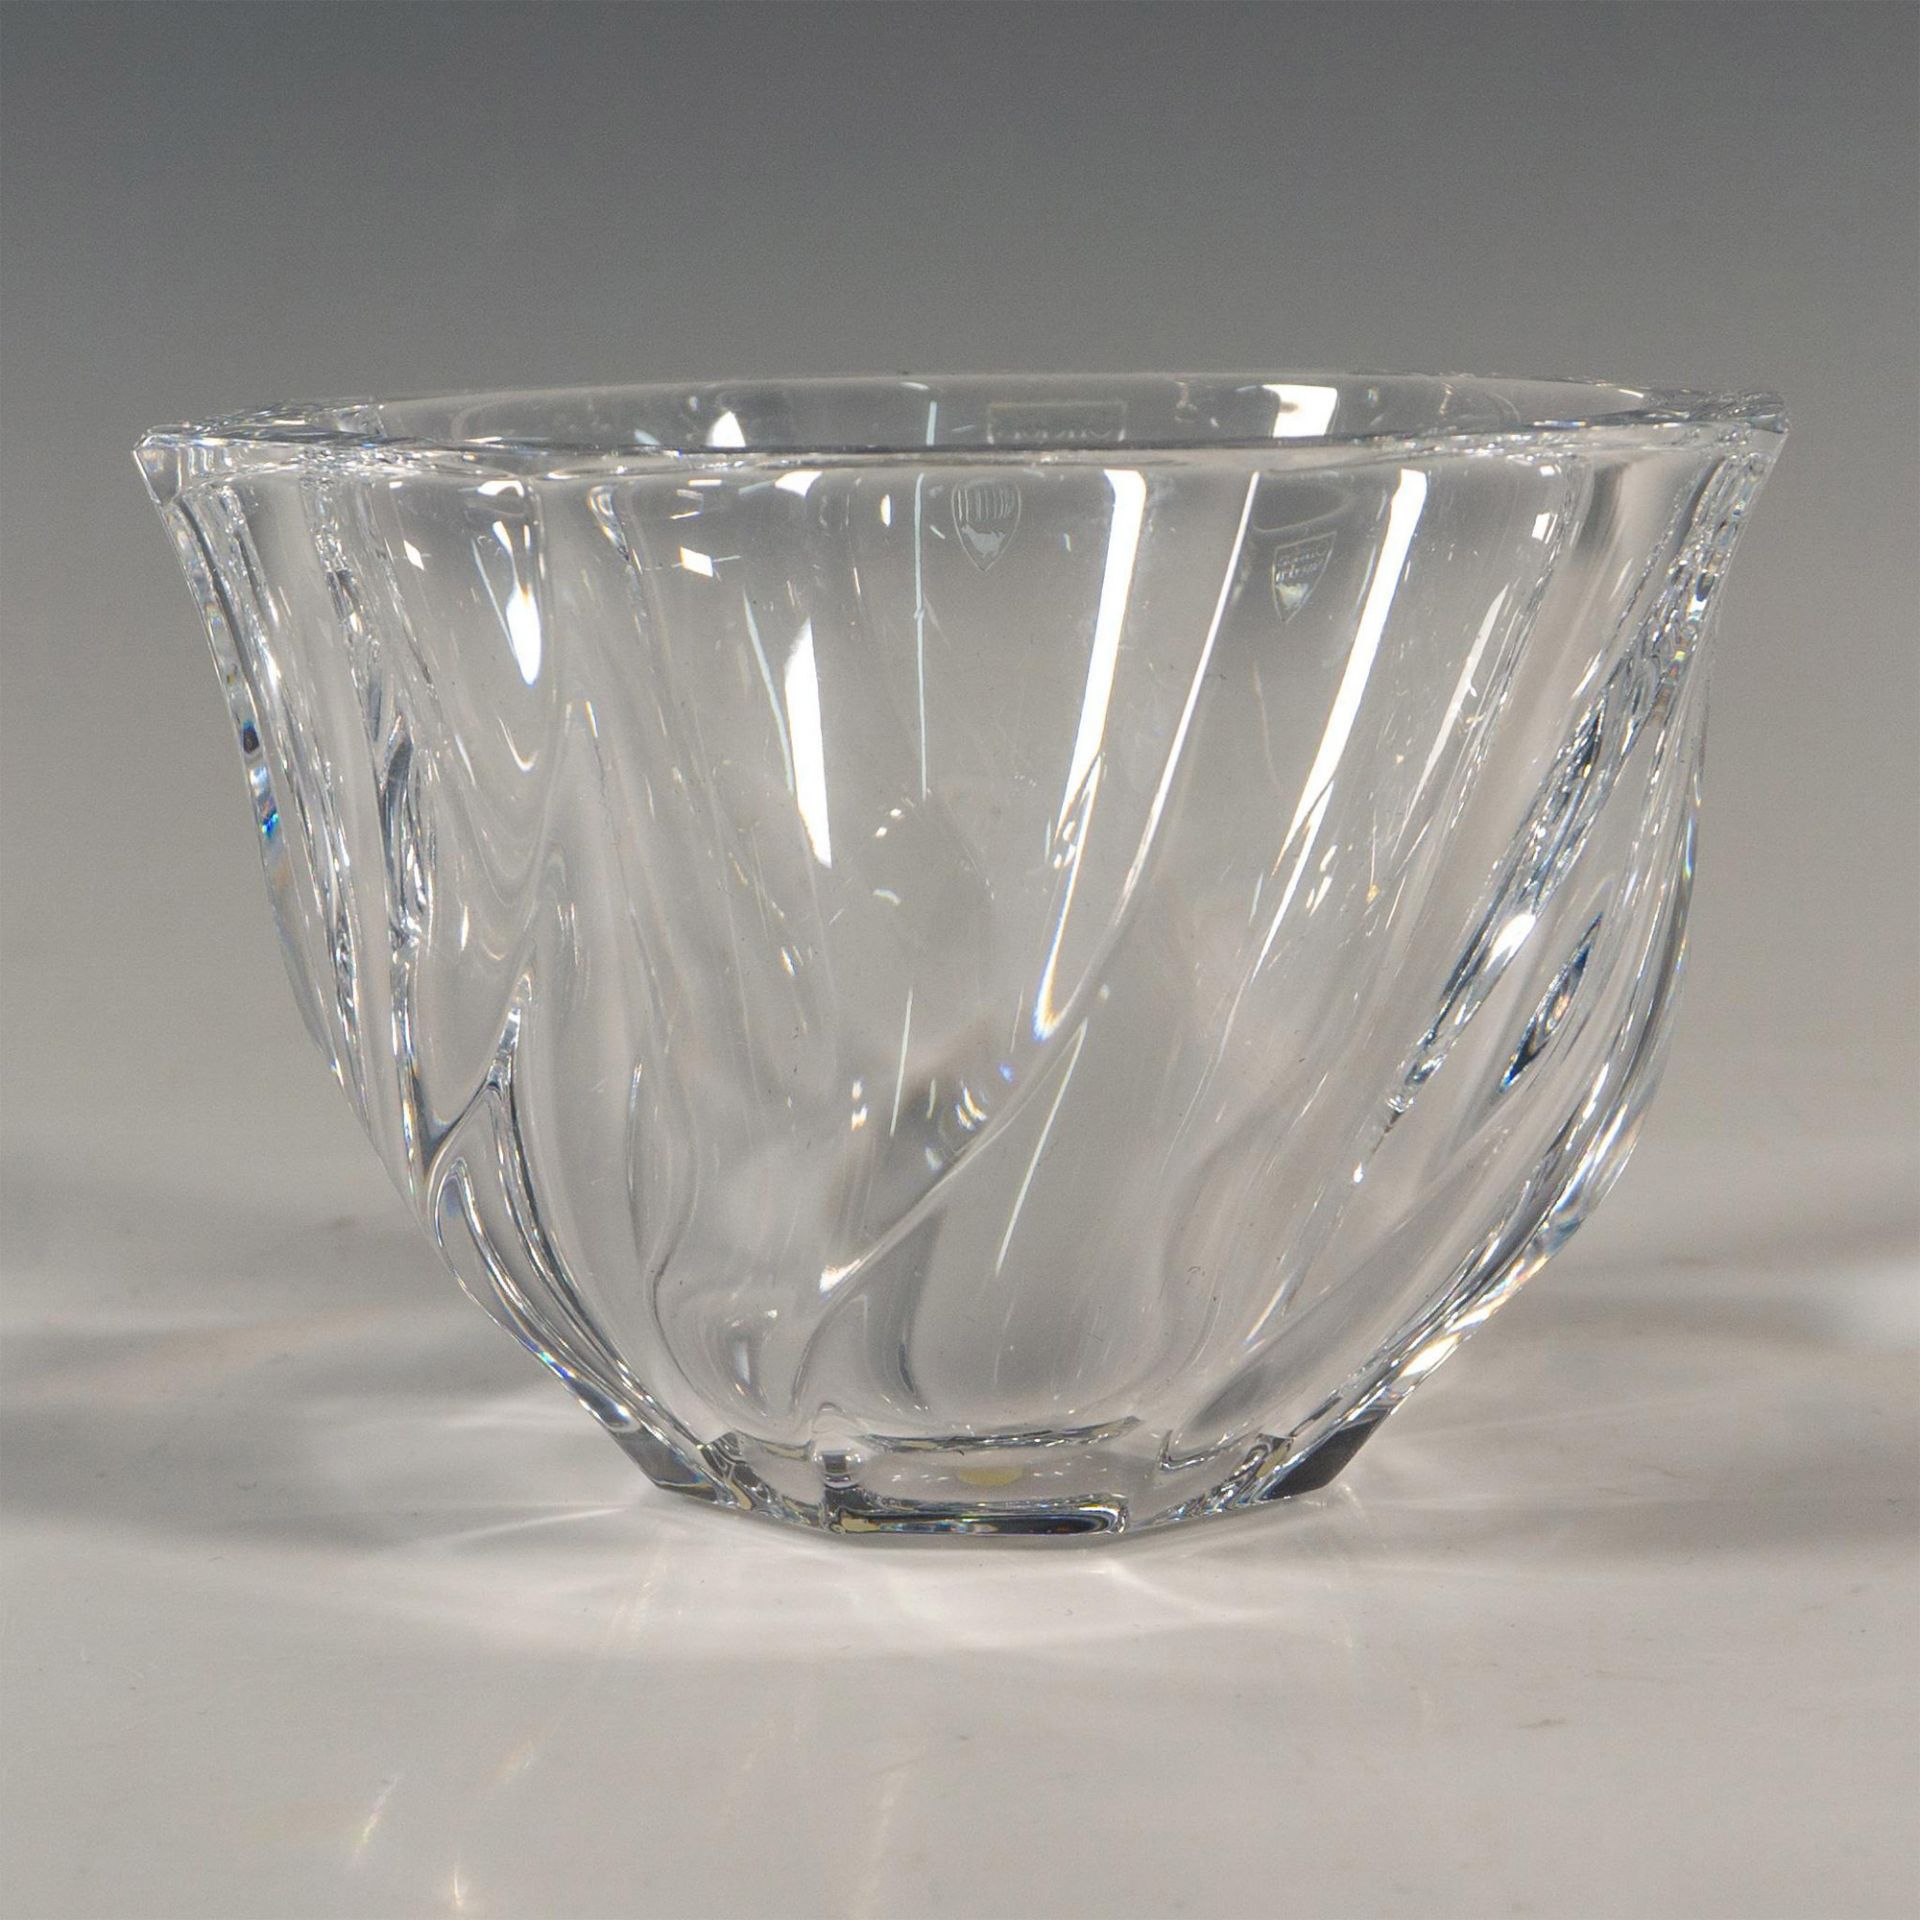 Orrefors by Olle Alberius Crystal Bowl, Residence - Image 3 of 4